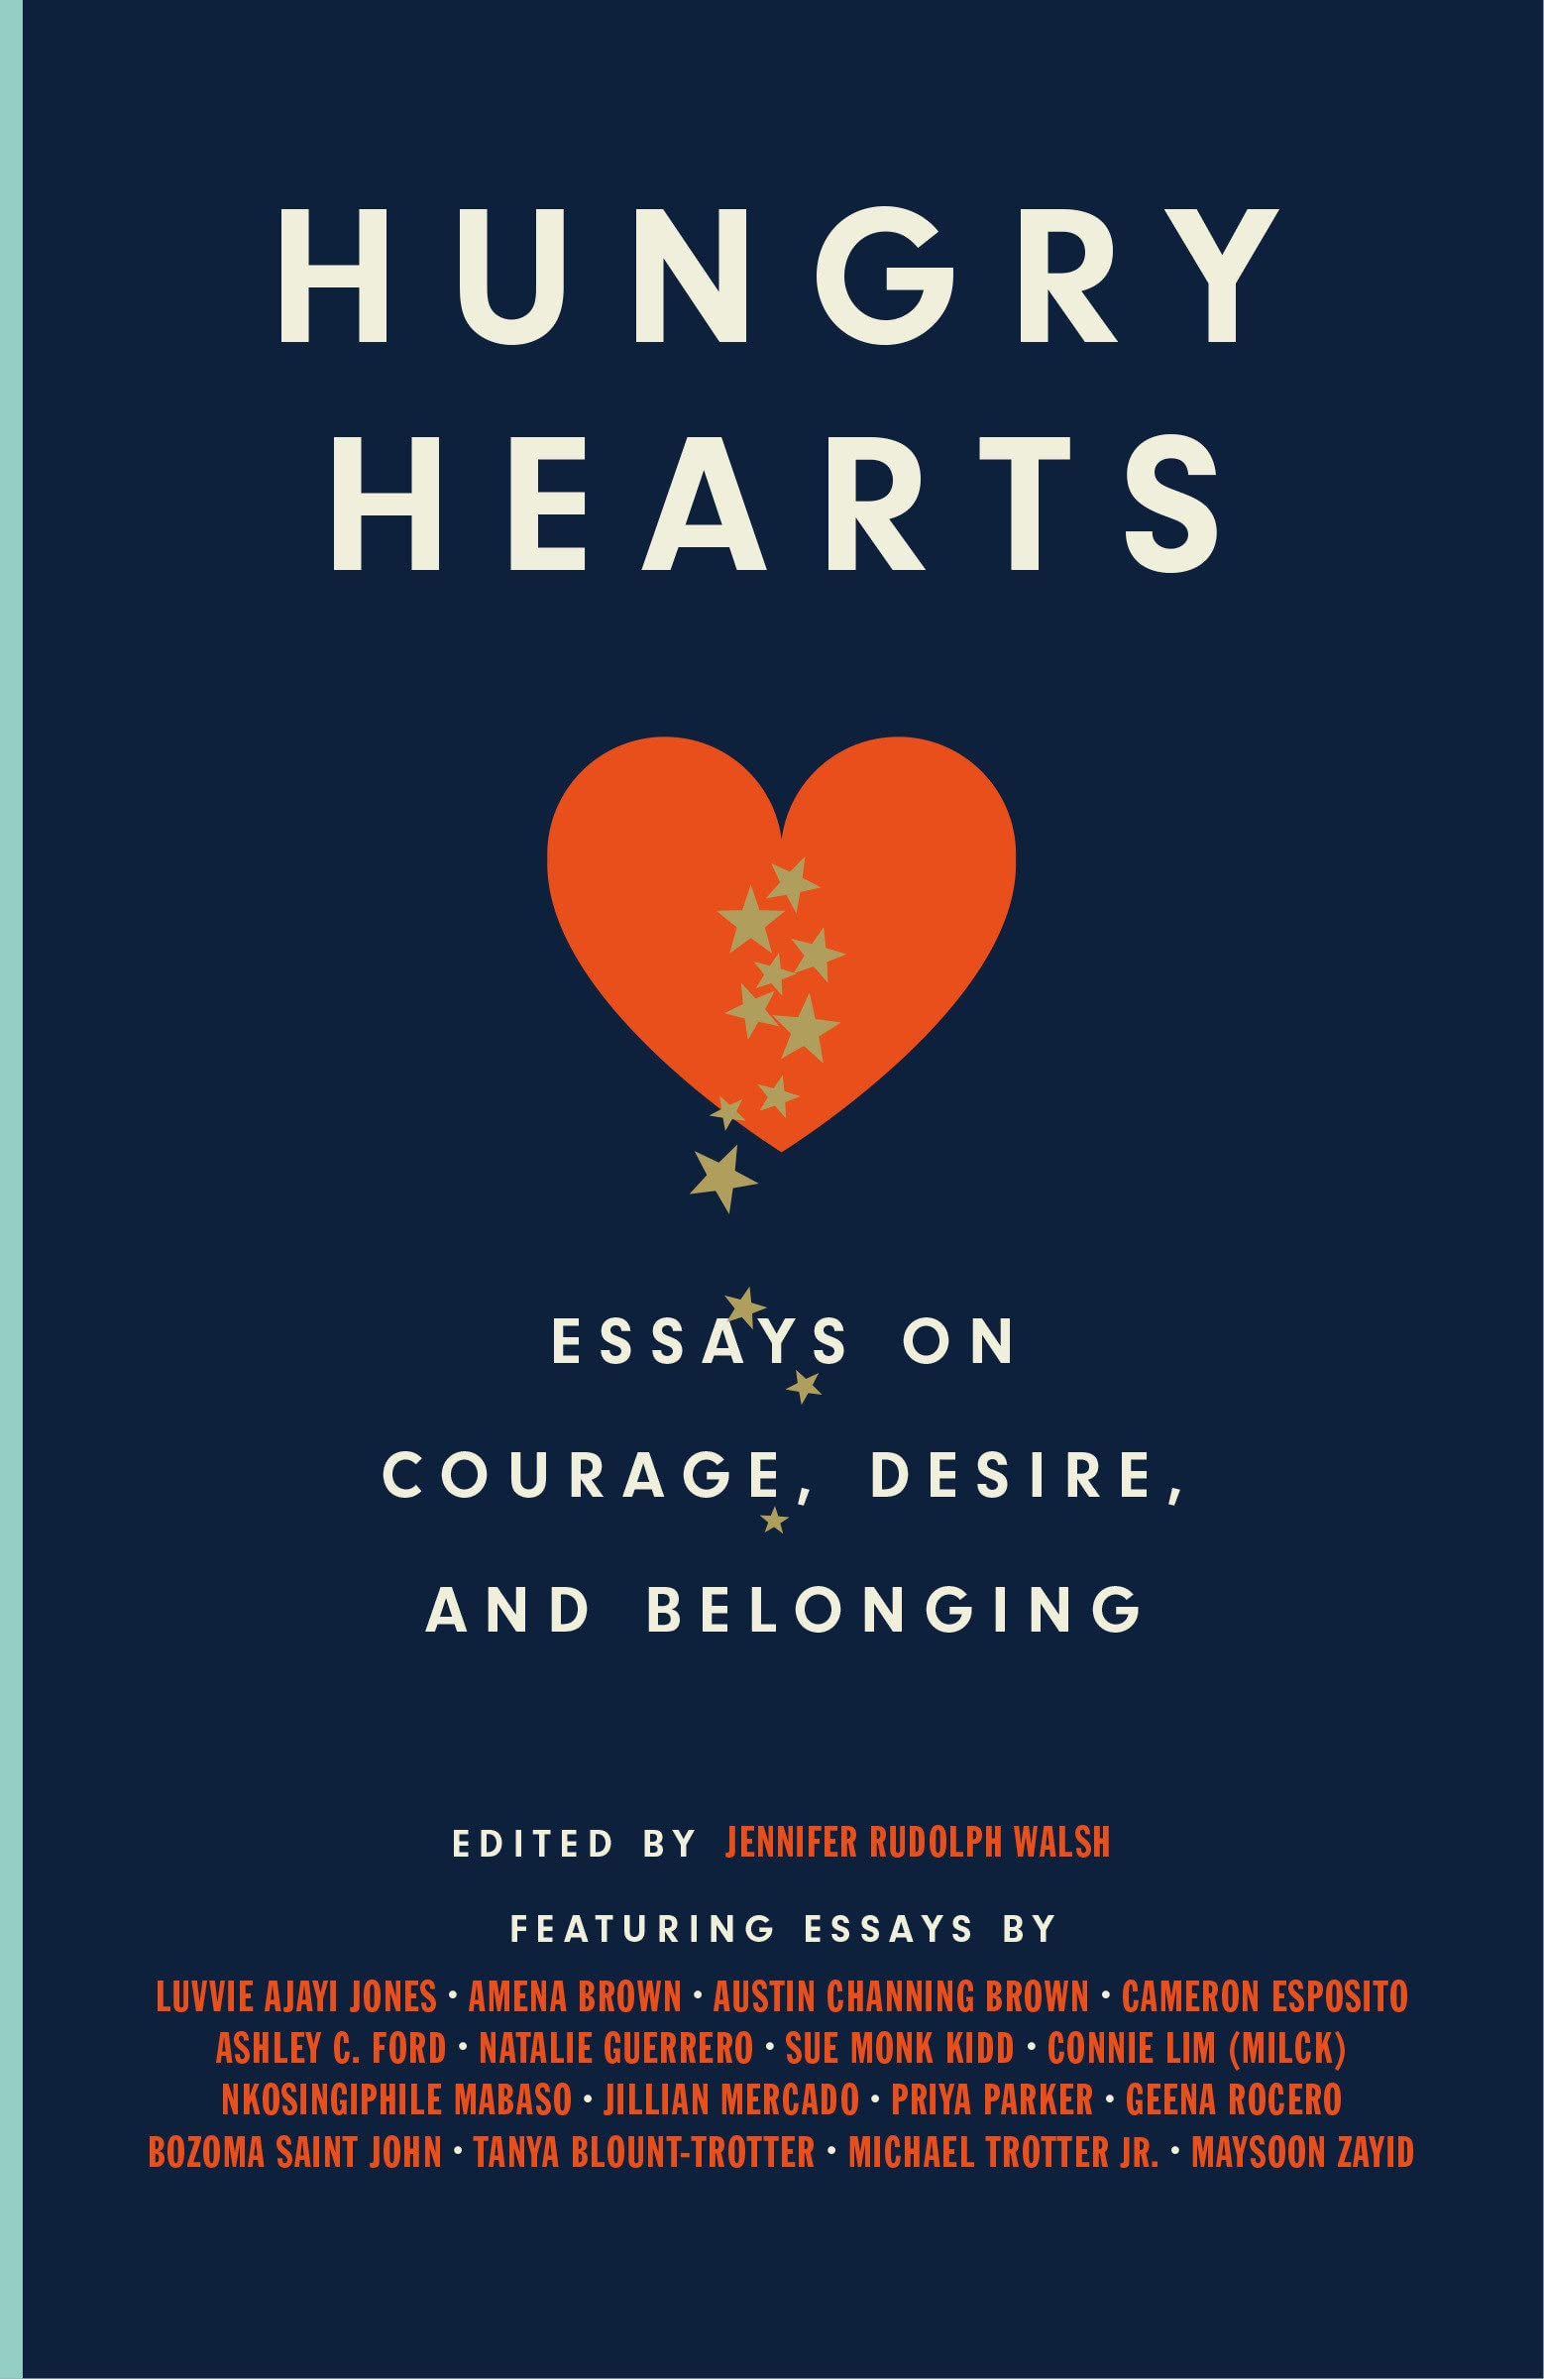 Hungry Hearts: Essays on Courage, Desire, and Belonging - SureShot Books Publishing LLC